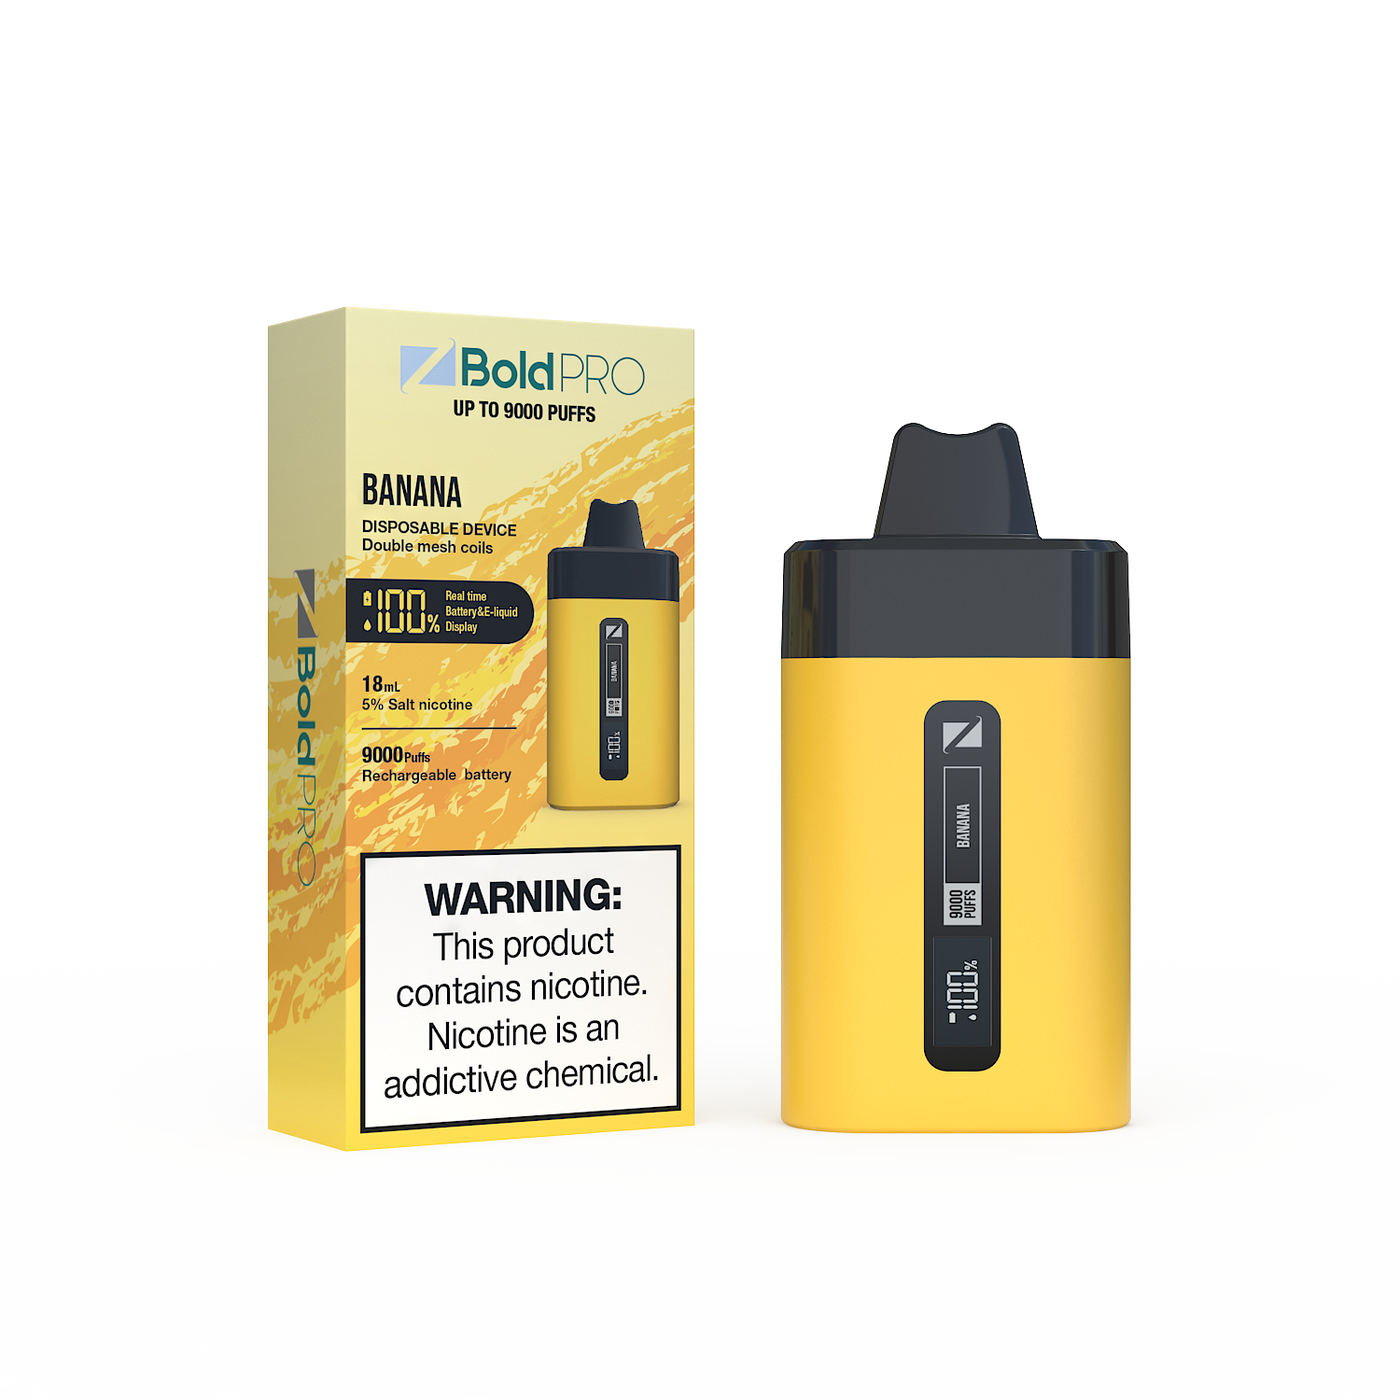 Z Bold Pro - Banana - 9000 Puffs - LED Screen with Juice and Battery Indicator